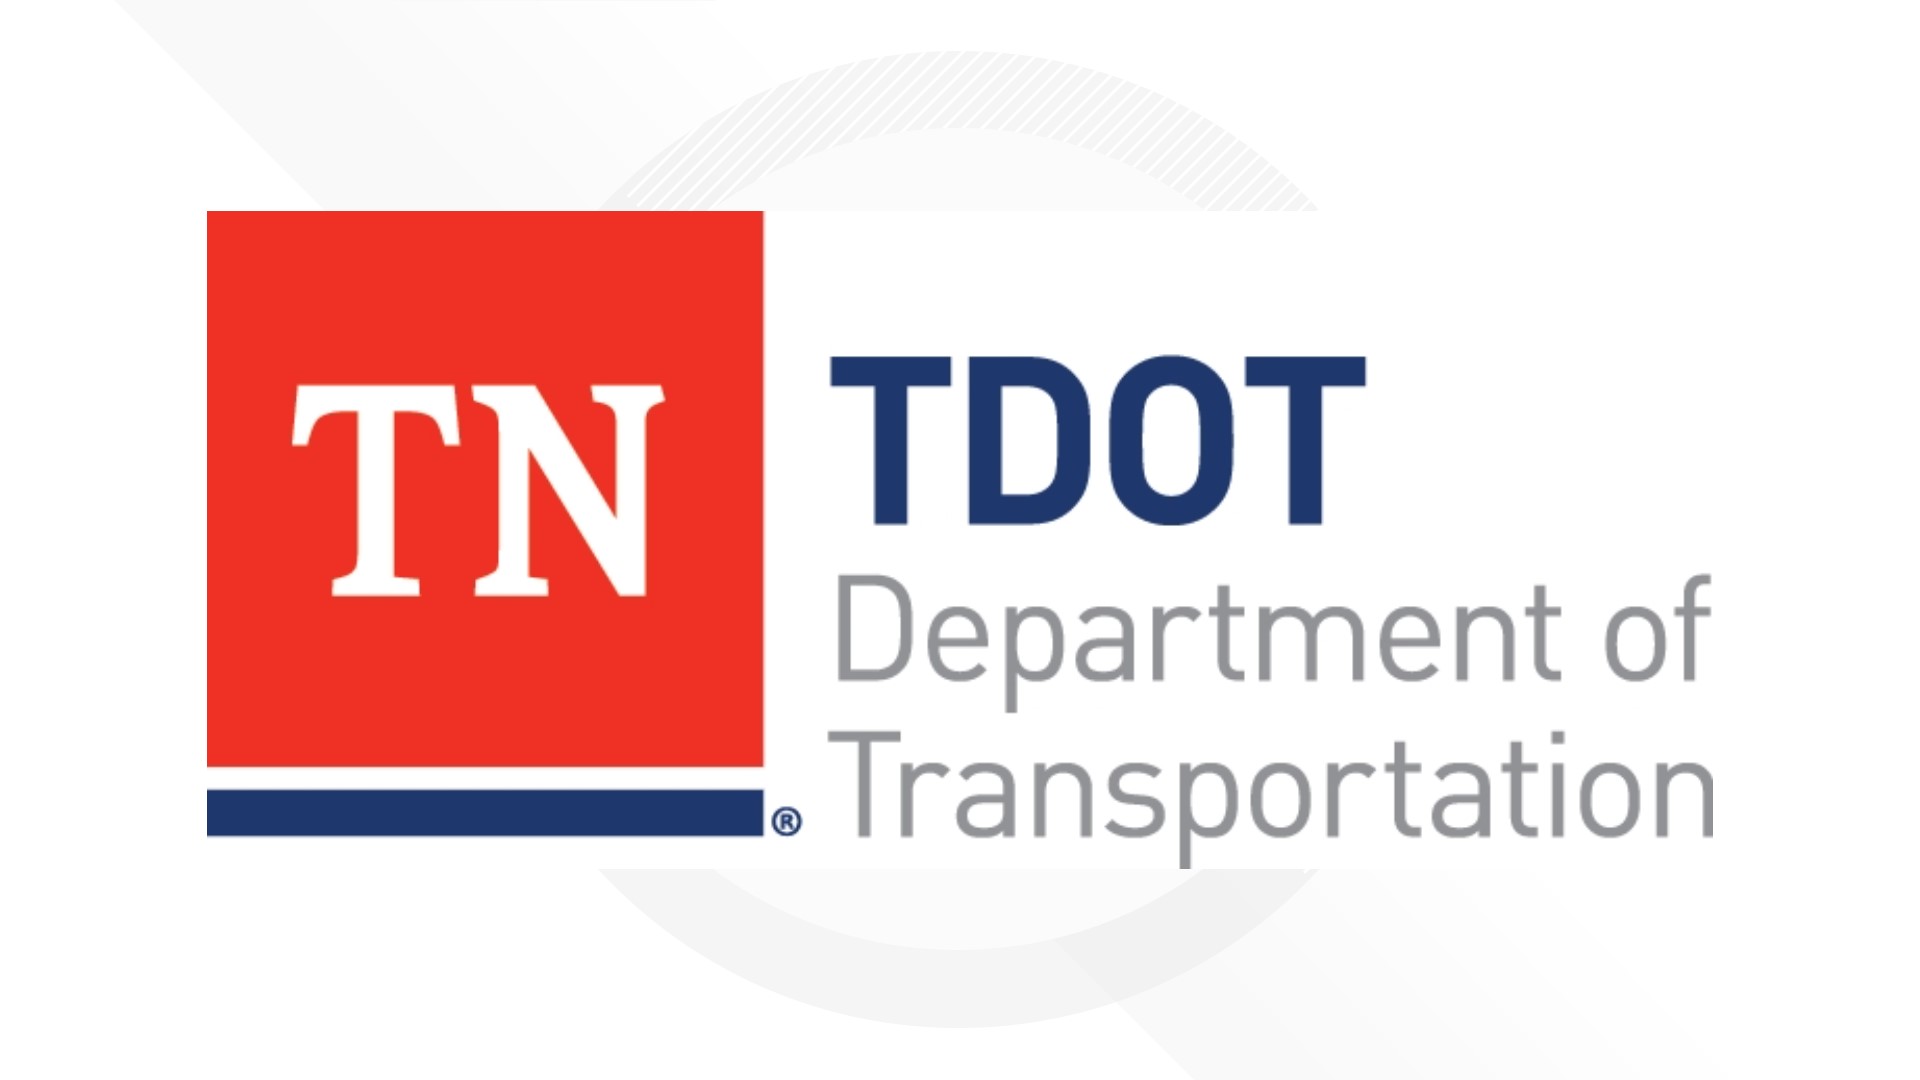 The Tennessee Department of Transportation said the crash was reported at around 4:21 p.m. EDT.